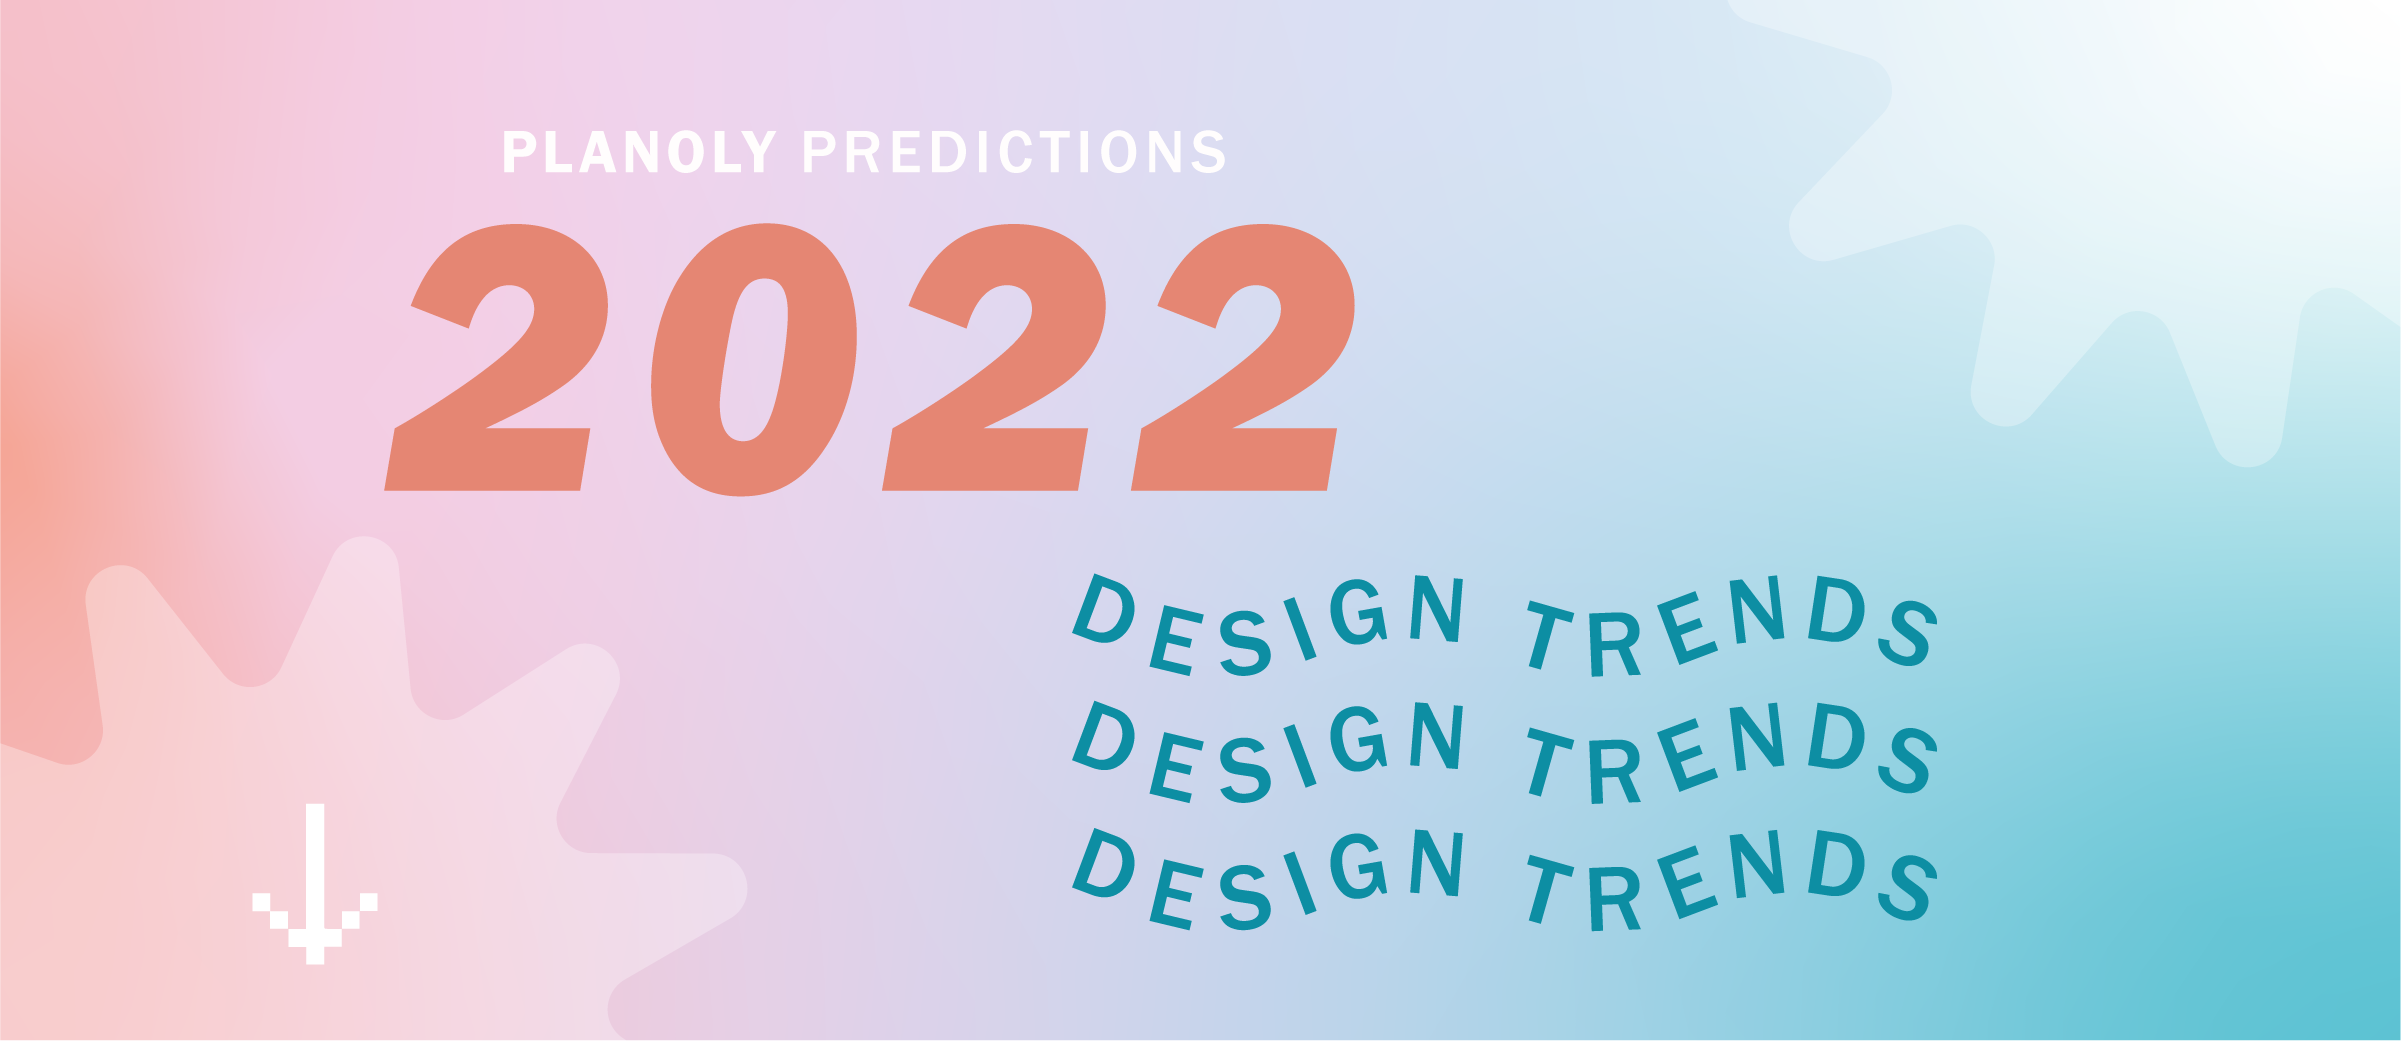 Top Graphic Design Trends to Look out For in 2022, by planoly